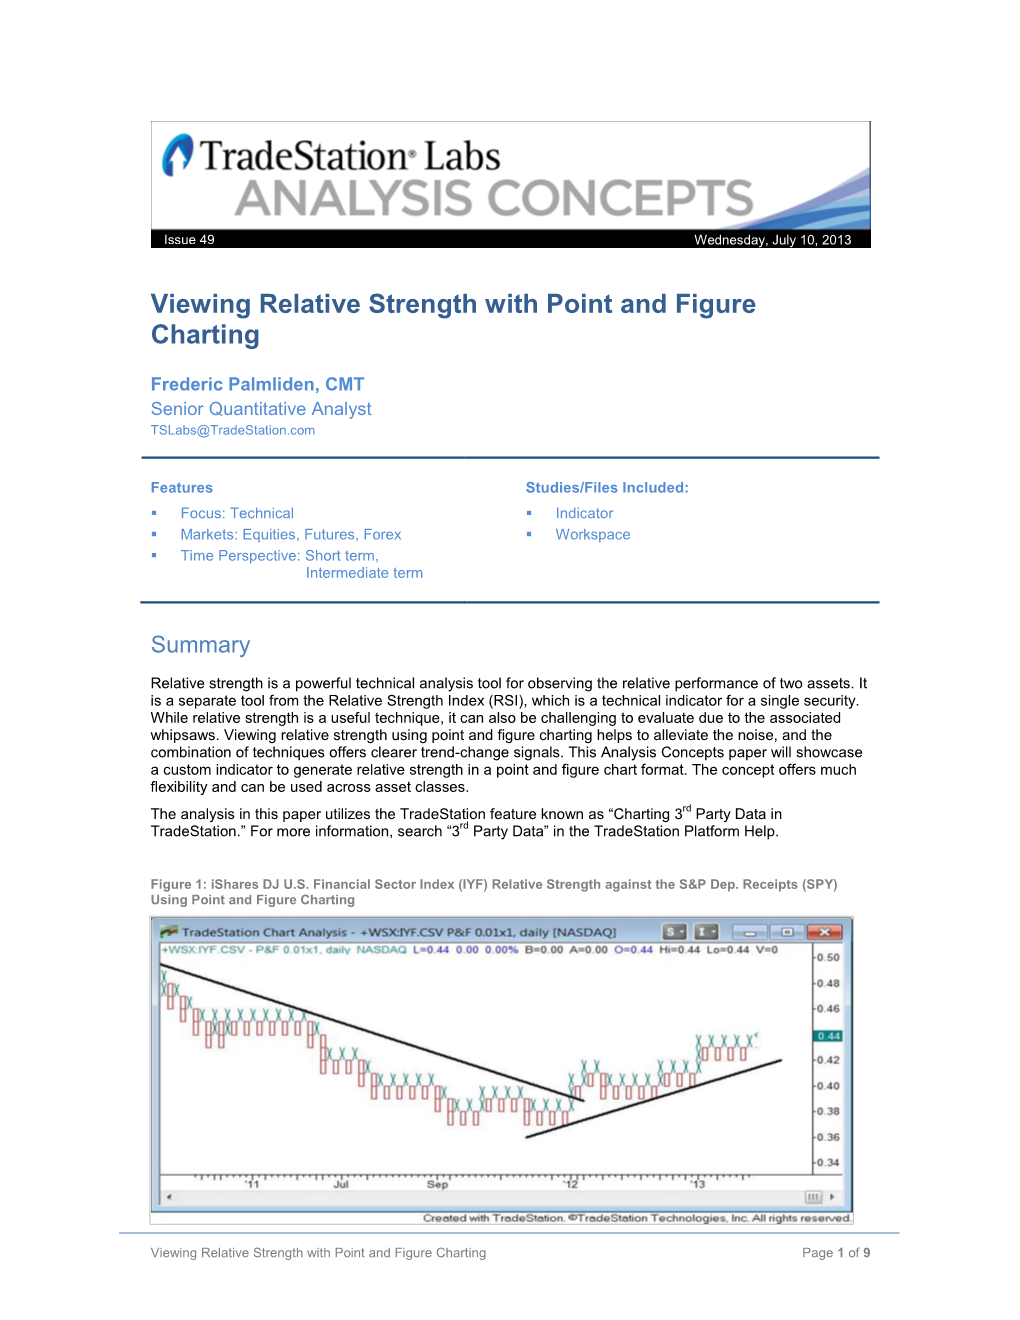 Viewing Relative Strength with Point and Figure Charting